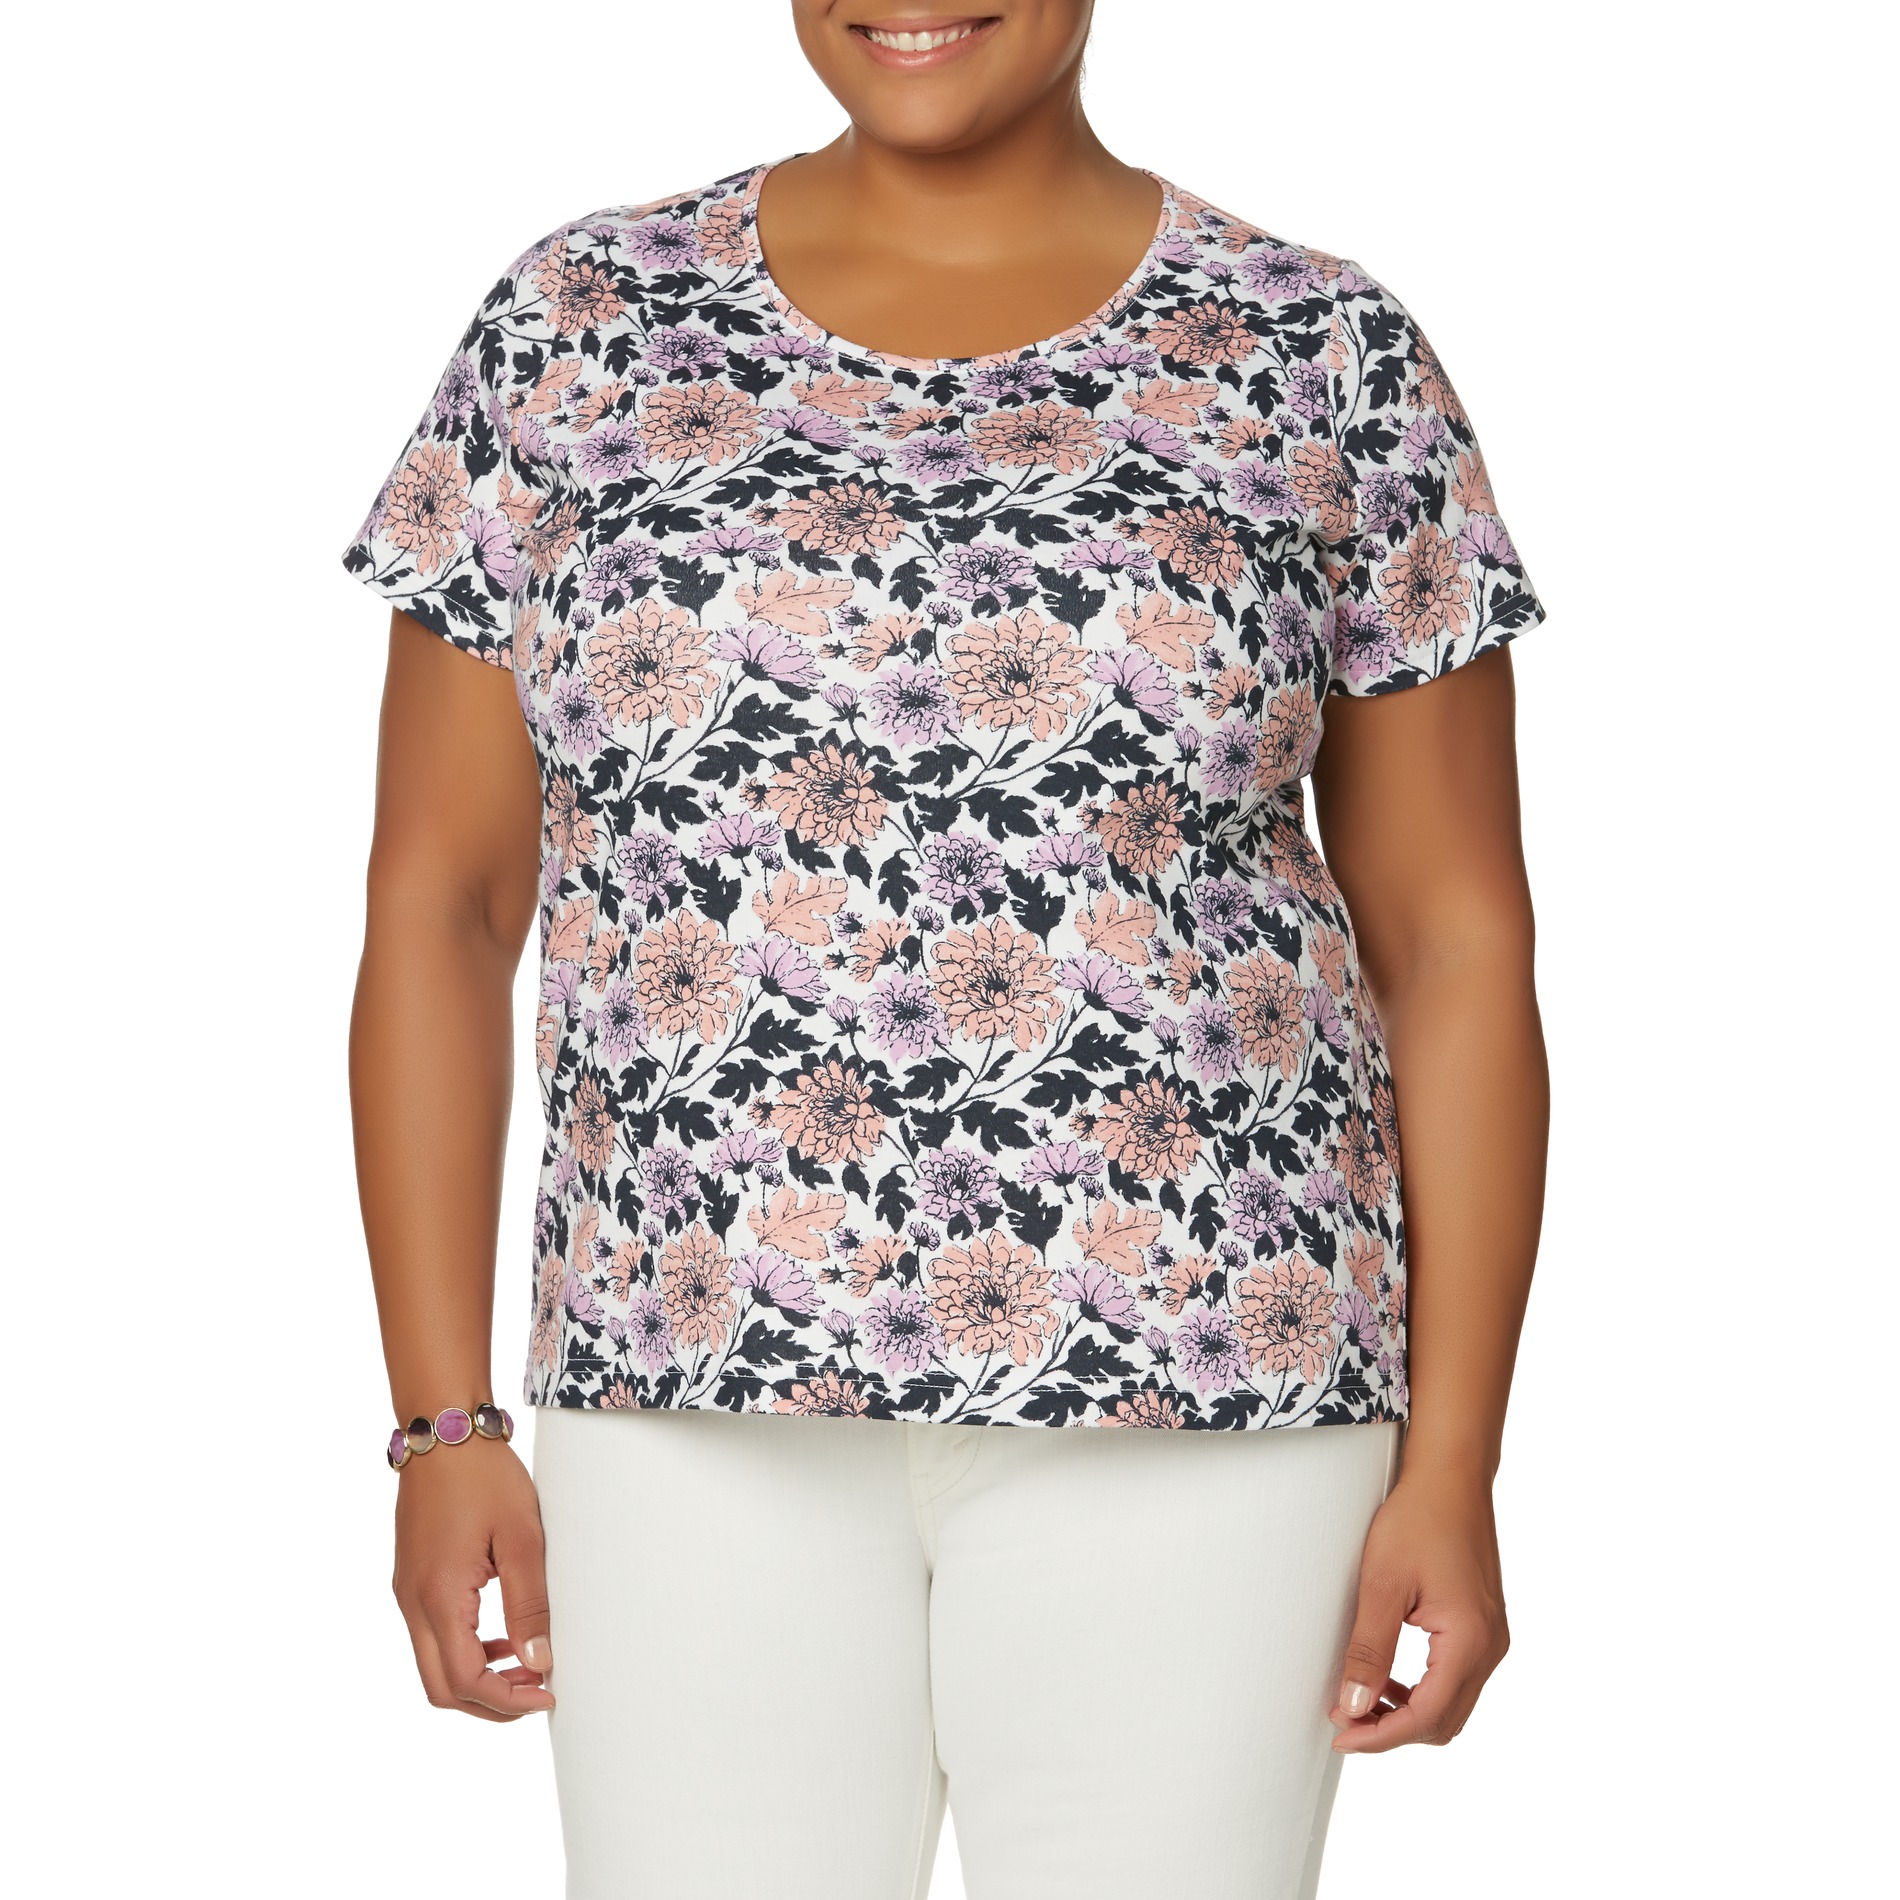 Basic Editions Women's Plus Relaxed Fit Top - Floral